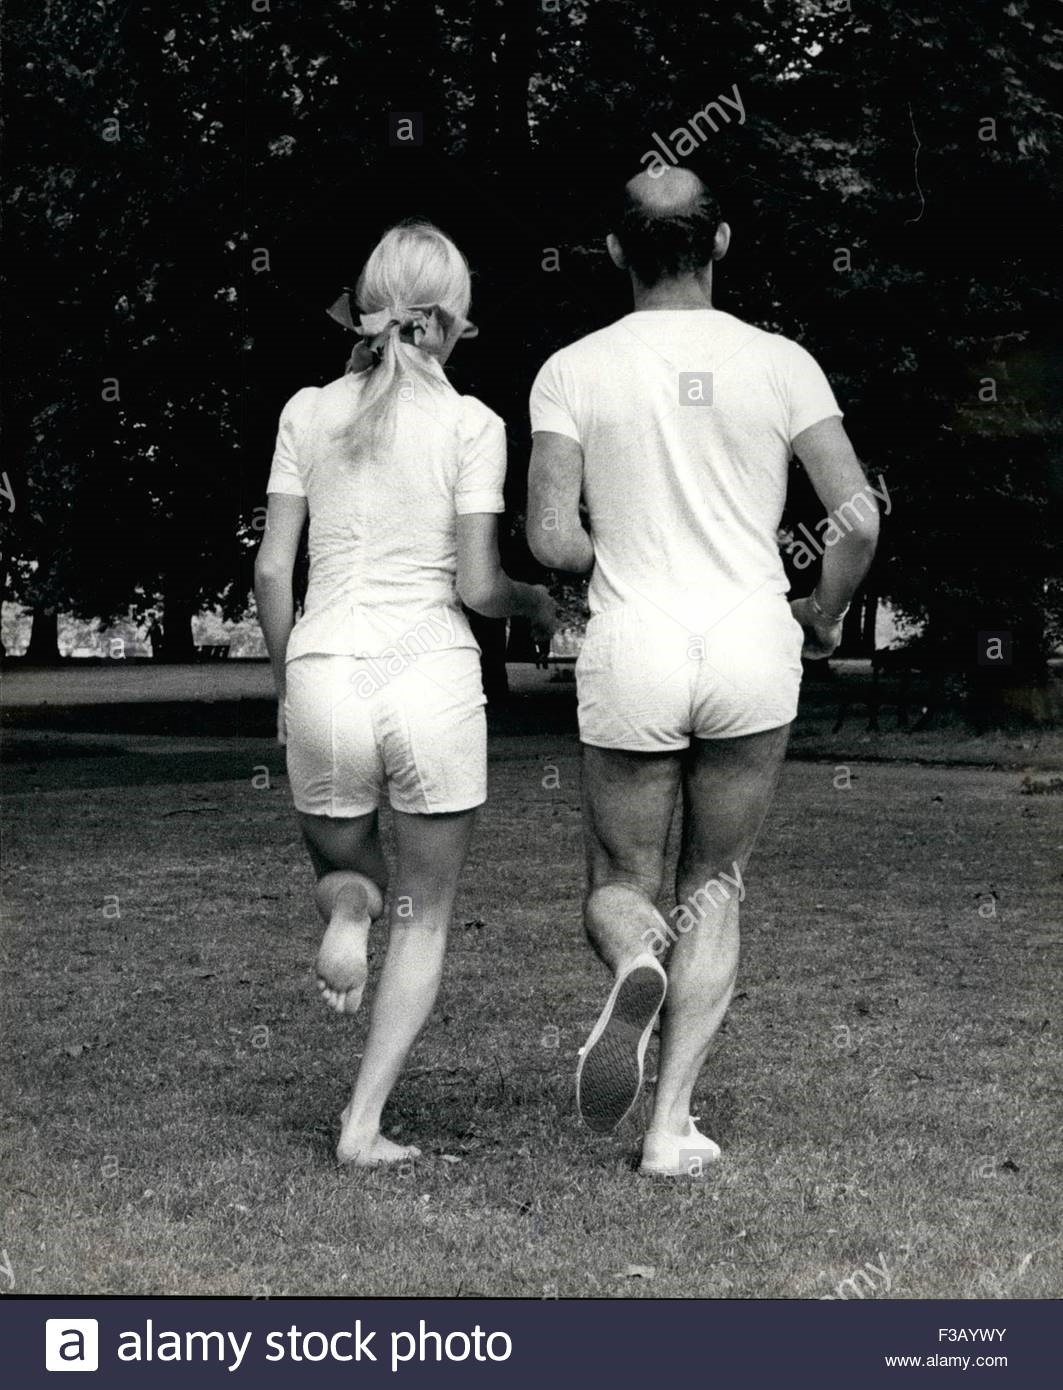 January 03, 1965. Stirling finds a keep-fit friend: in training for his first to competitive drive in several years, the 84 hour marathon event at West Germany's Nurbugring circuit, in August - Stirling Moss has hately been taking an early morning keep-fit run in Hyde Park. And in the last week he has been joined by an attractive young Swedish actress. Agneta Eckemyr, whom he met in the park, who is also a keep fit fiend and a near neighbour of Stirling. Agneta, 18, has been in London for two fil tests - one for the latest James Bond epic ''On her Majesty's Secret Service'' - and for ''A.B.C.D.E. 